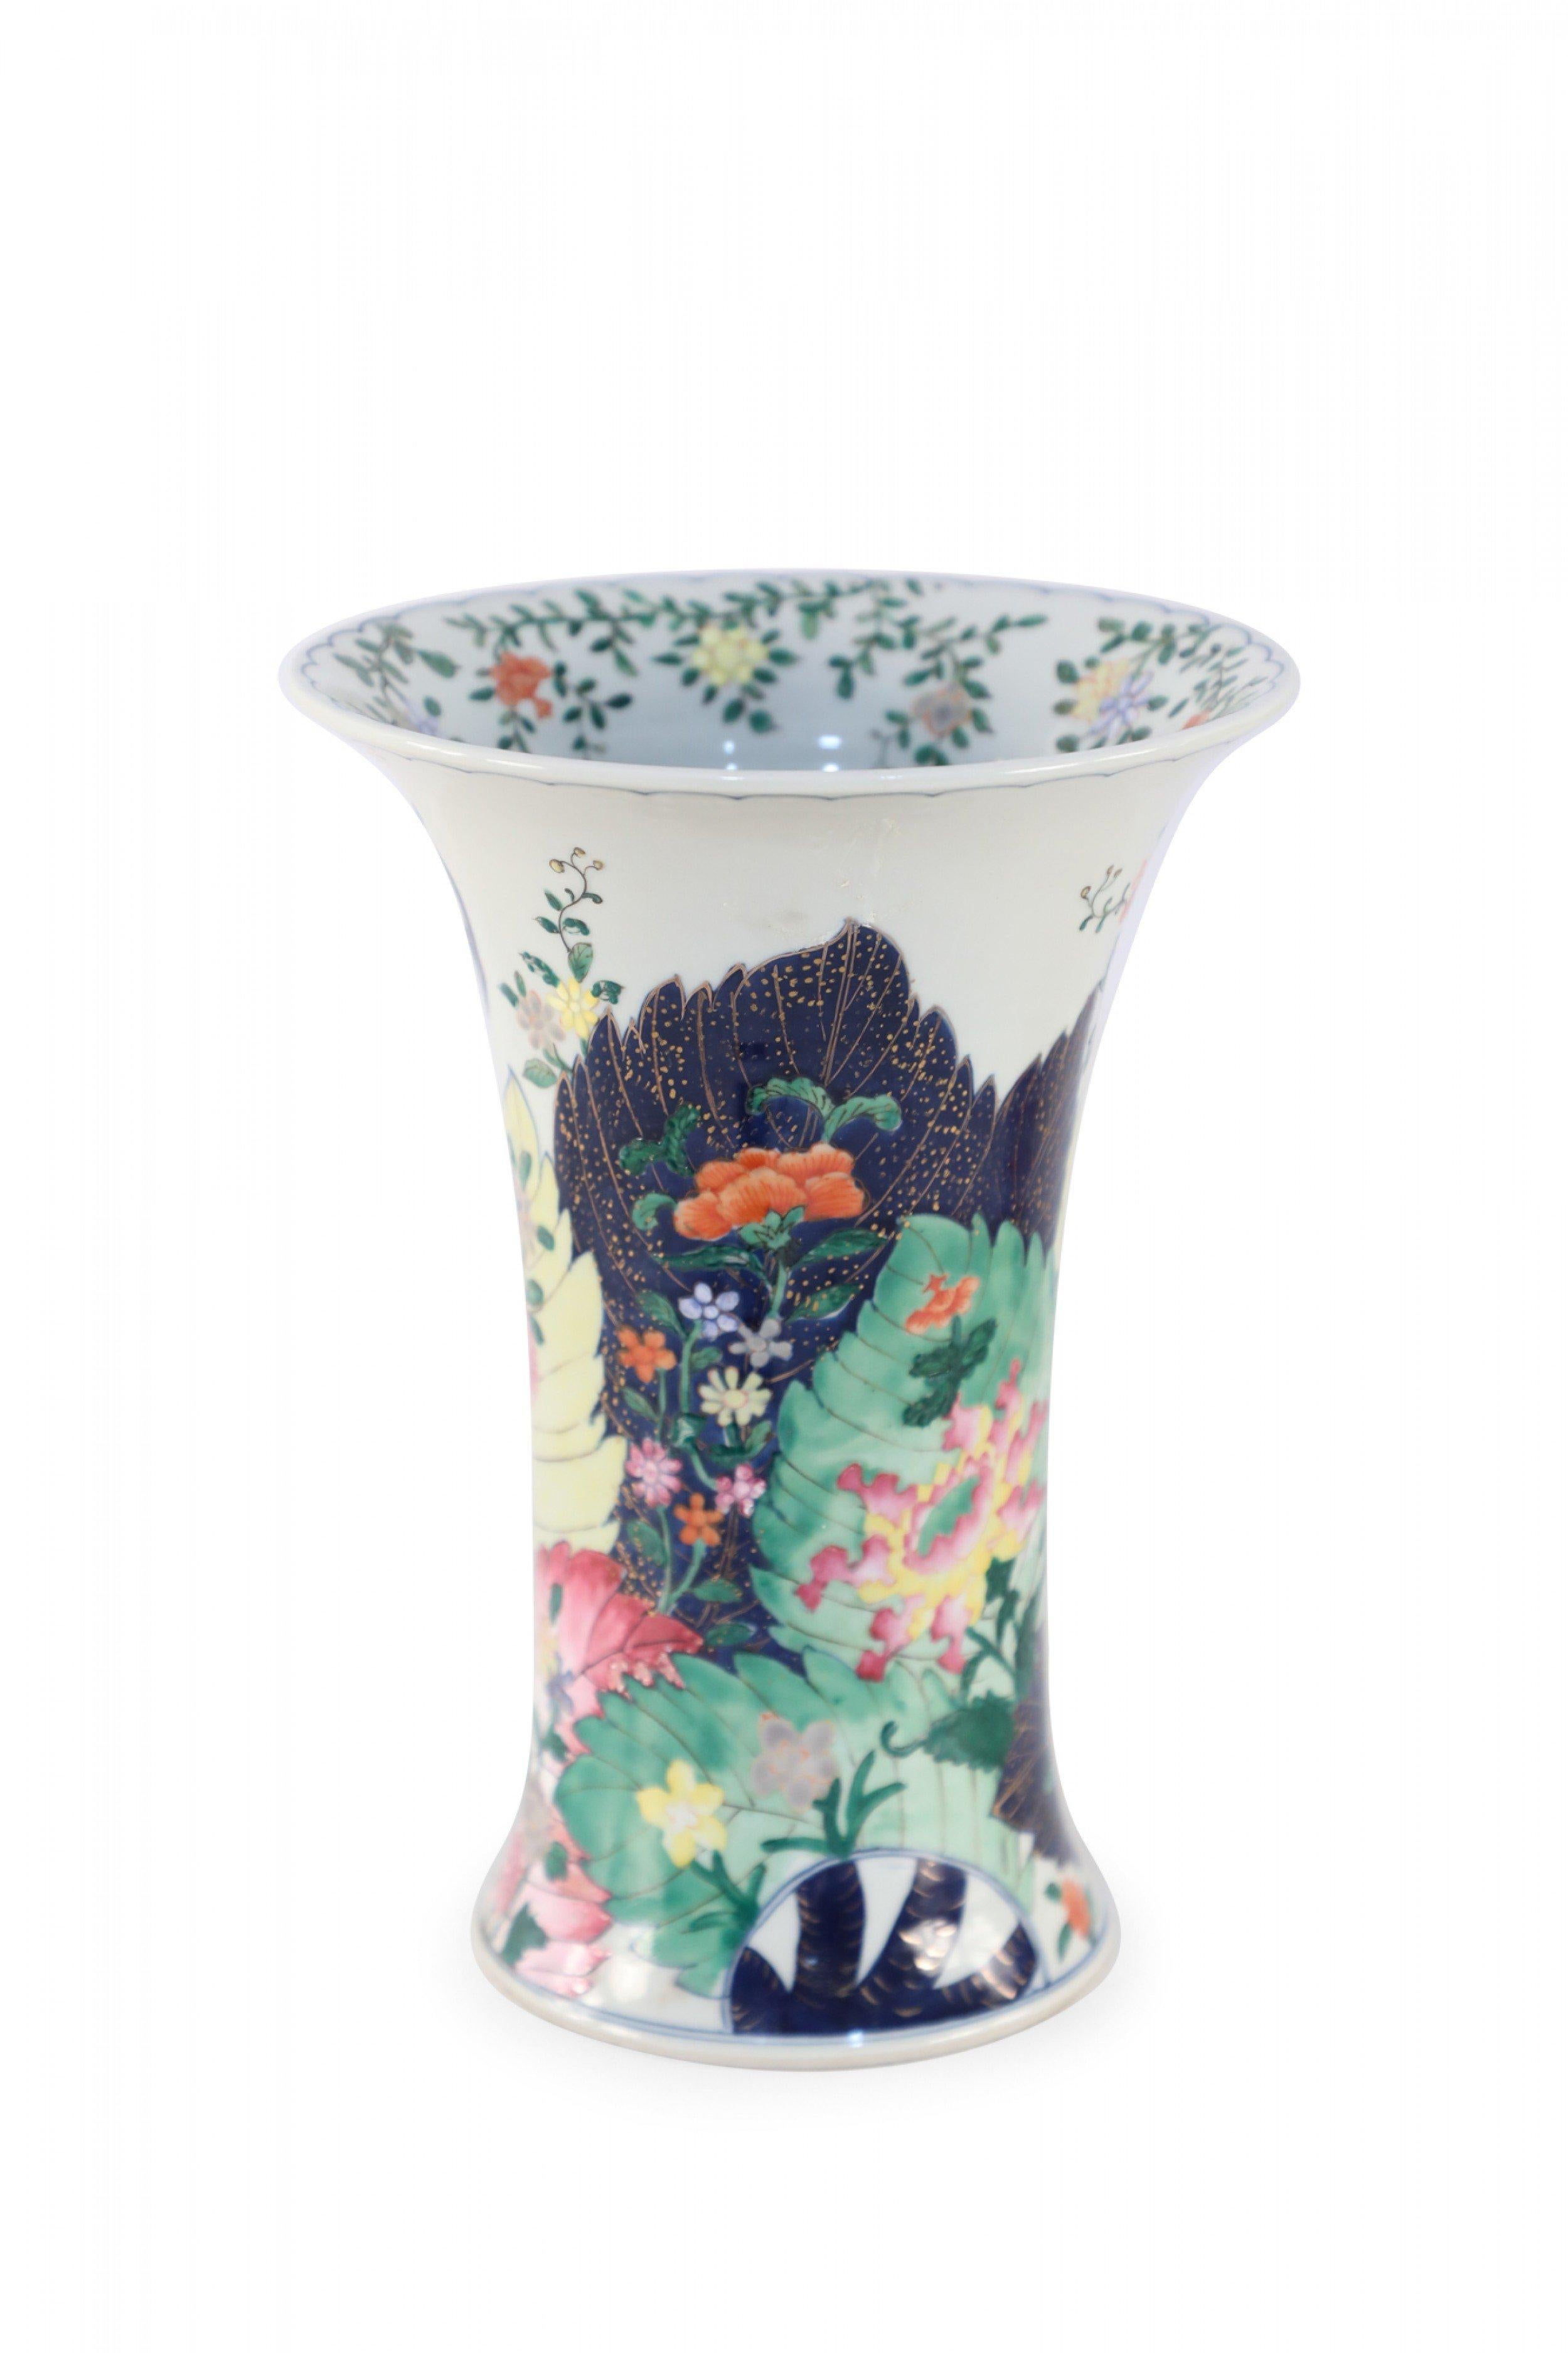 Chinese White Porcelain Peacock and Floral Design Fluted Vase For Sale 3